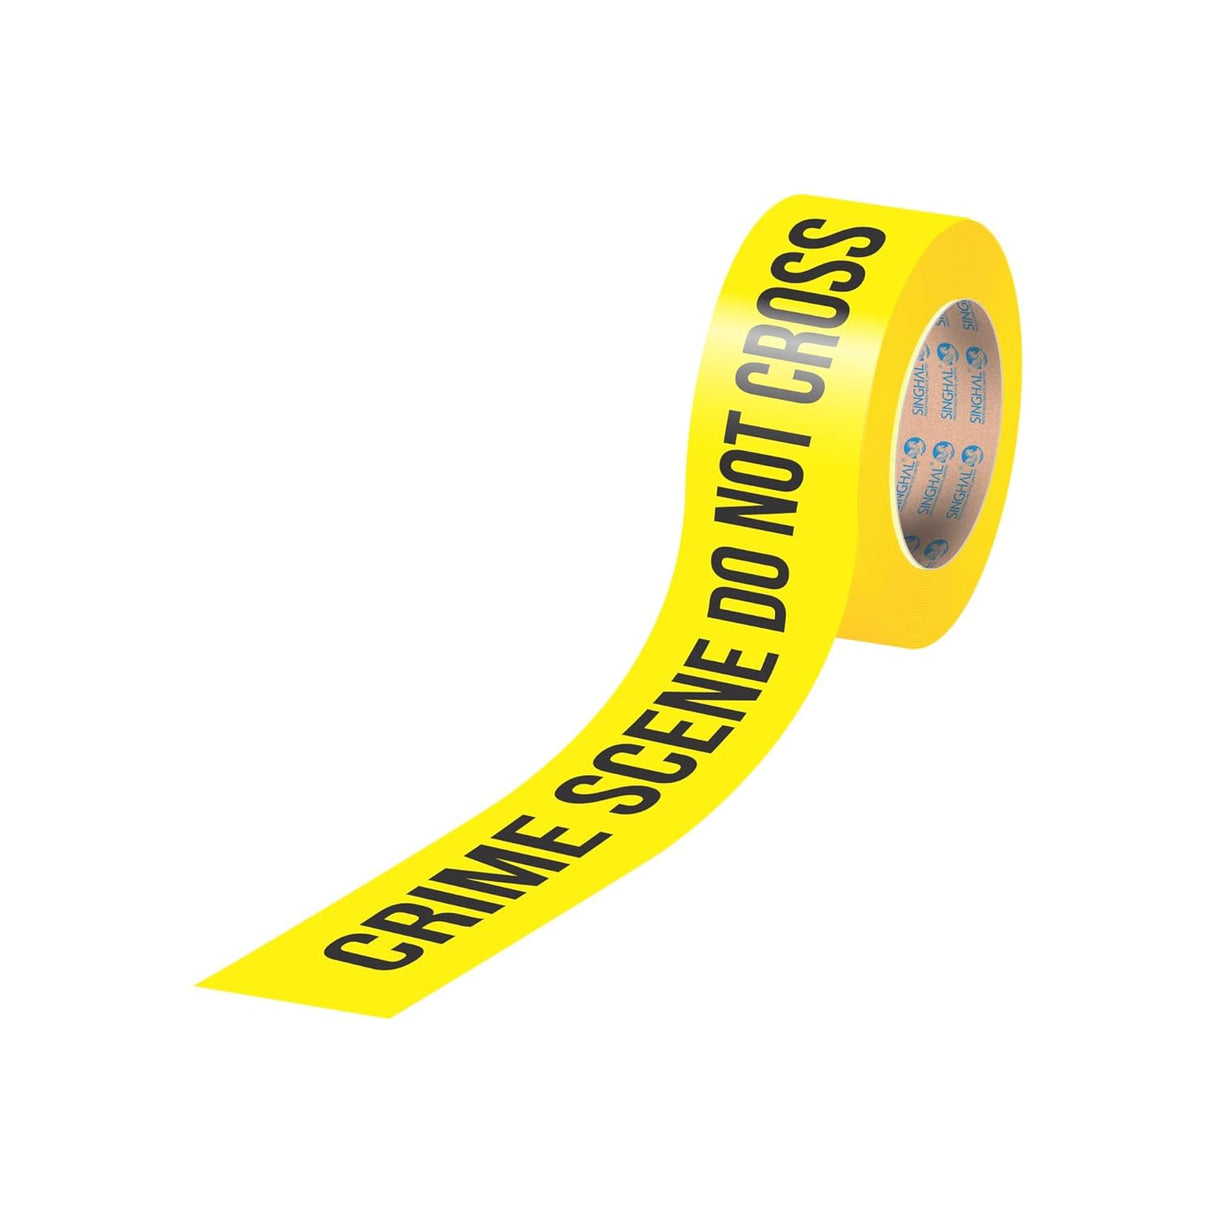 SINGHAL 3 Inch x 300 Meter Crime Scene Do Not Cross Barricade Tape Roll, High Visibility Bright Yellow Tape with Bold Black Print, Maximum Readability